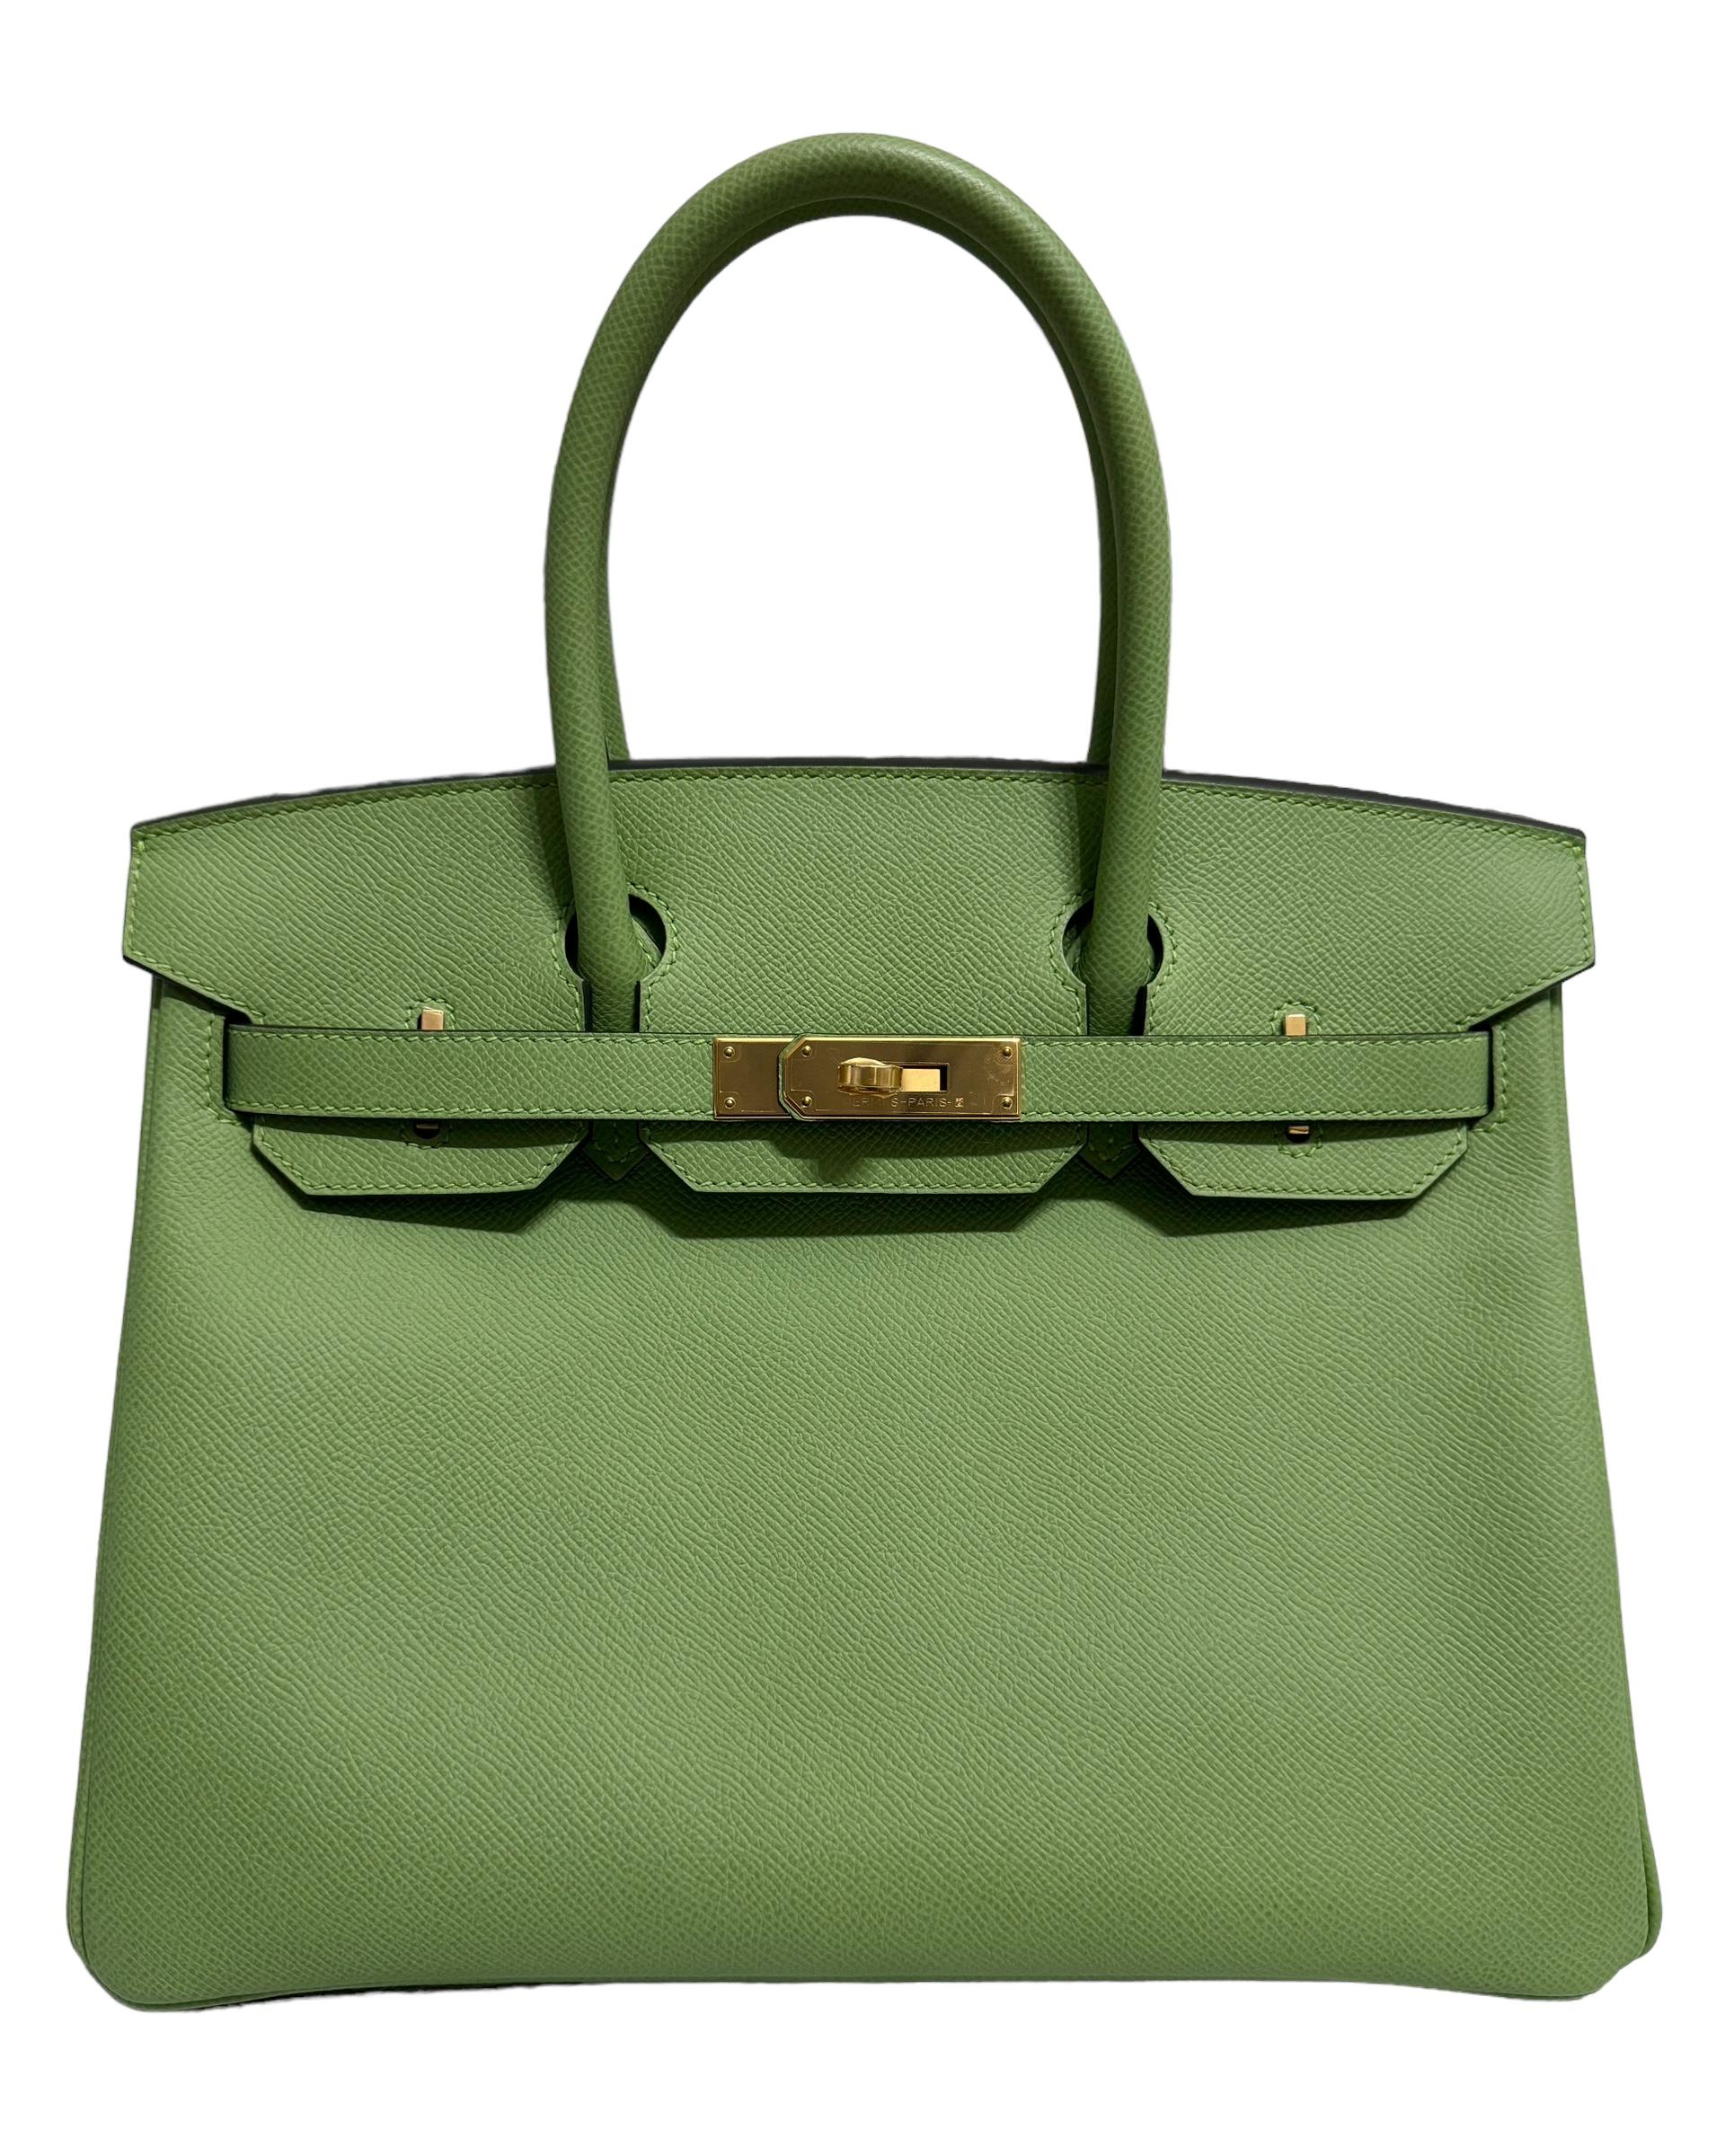 As New Absolutely Stunning Rare MOST COVETED COLOR SINCE IT'S RELEASE! Hermes Birkin 30  Vert Criquet. Complimented by Epsom Leather and Gold Hardware. Y Stamp 2020. 

Shop with Confidence from Lux Addicts. Authenticity Guaranteed! 
